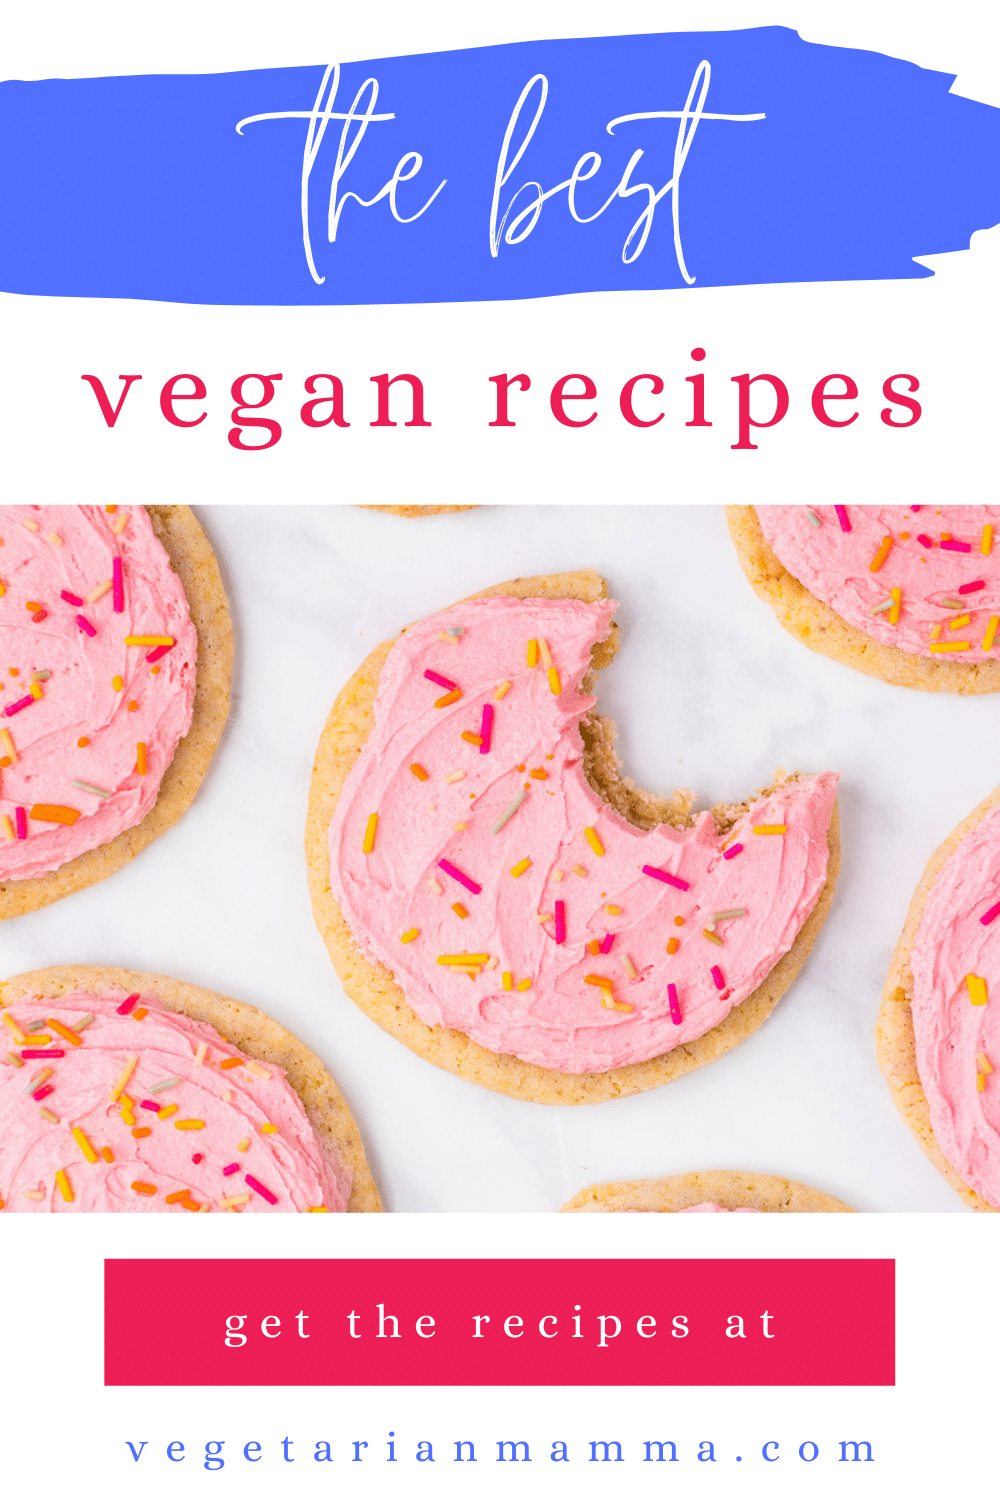 These are truly the best vegan recipes! This list has it all, from flavorful vegan dinner recipes to easy meal prep snacks and even decadent vegan desserts. Read on to learn how to make over 19+ amazing vegan recipes.